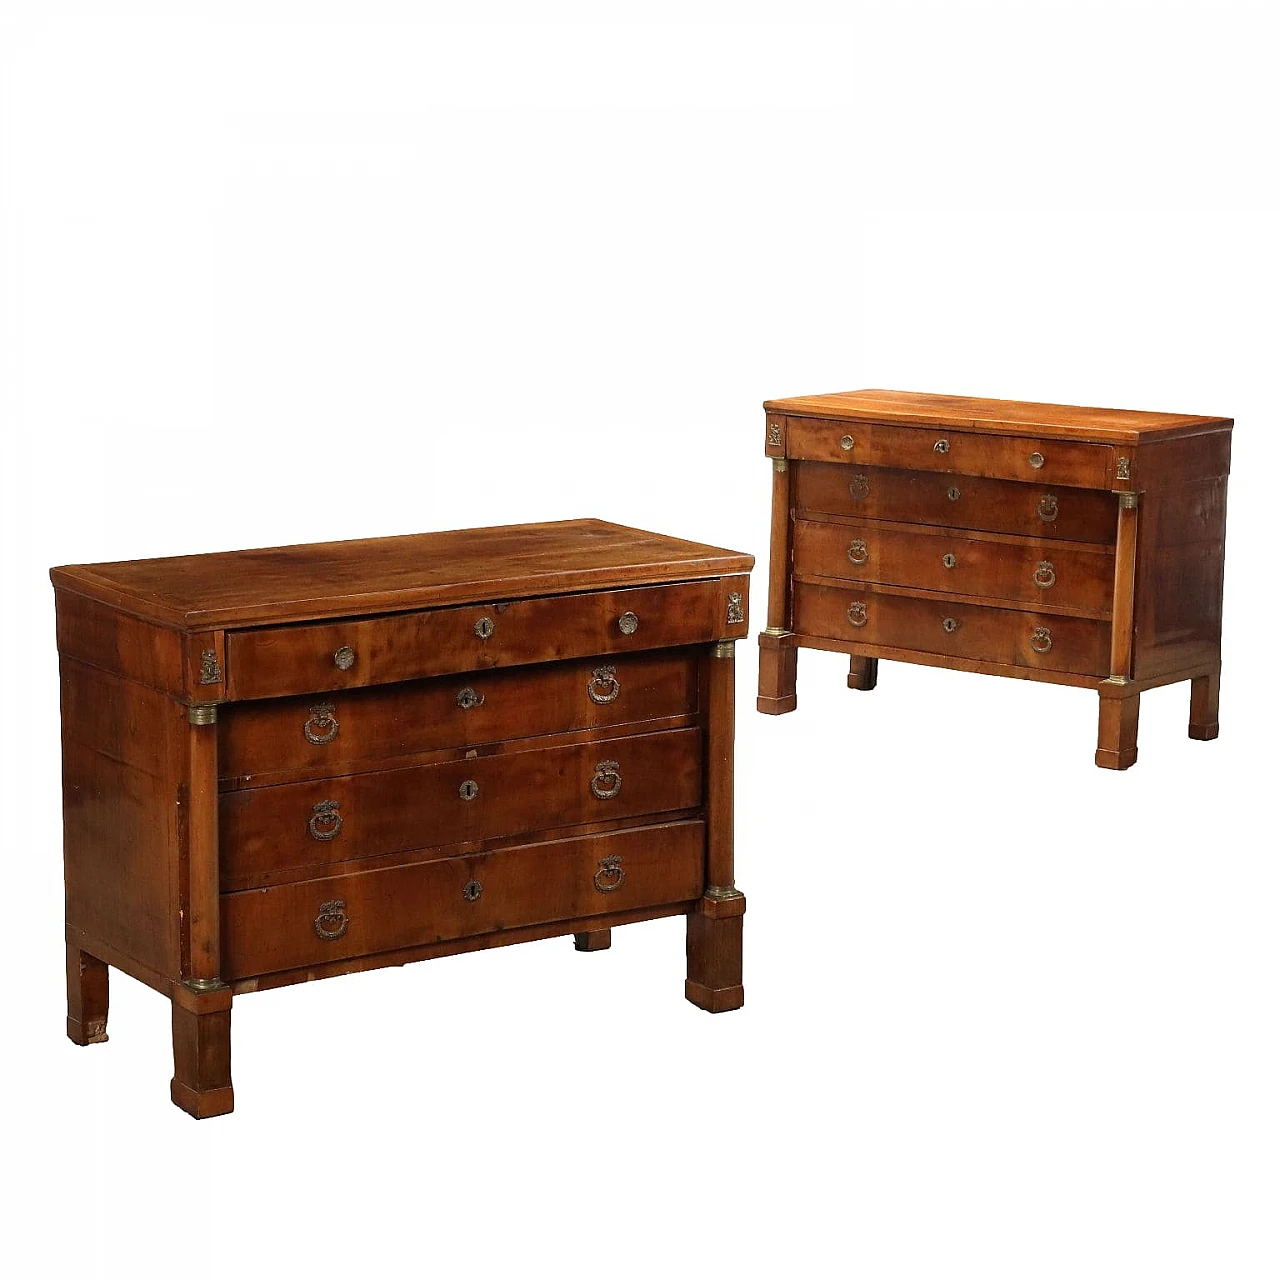 Pair of walnut, fir & bronze dressers with 4 drawers, 19th century 1